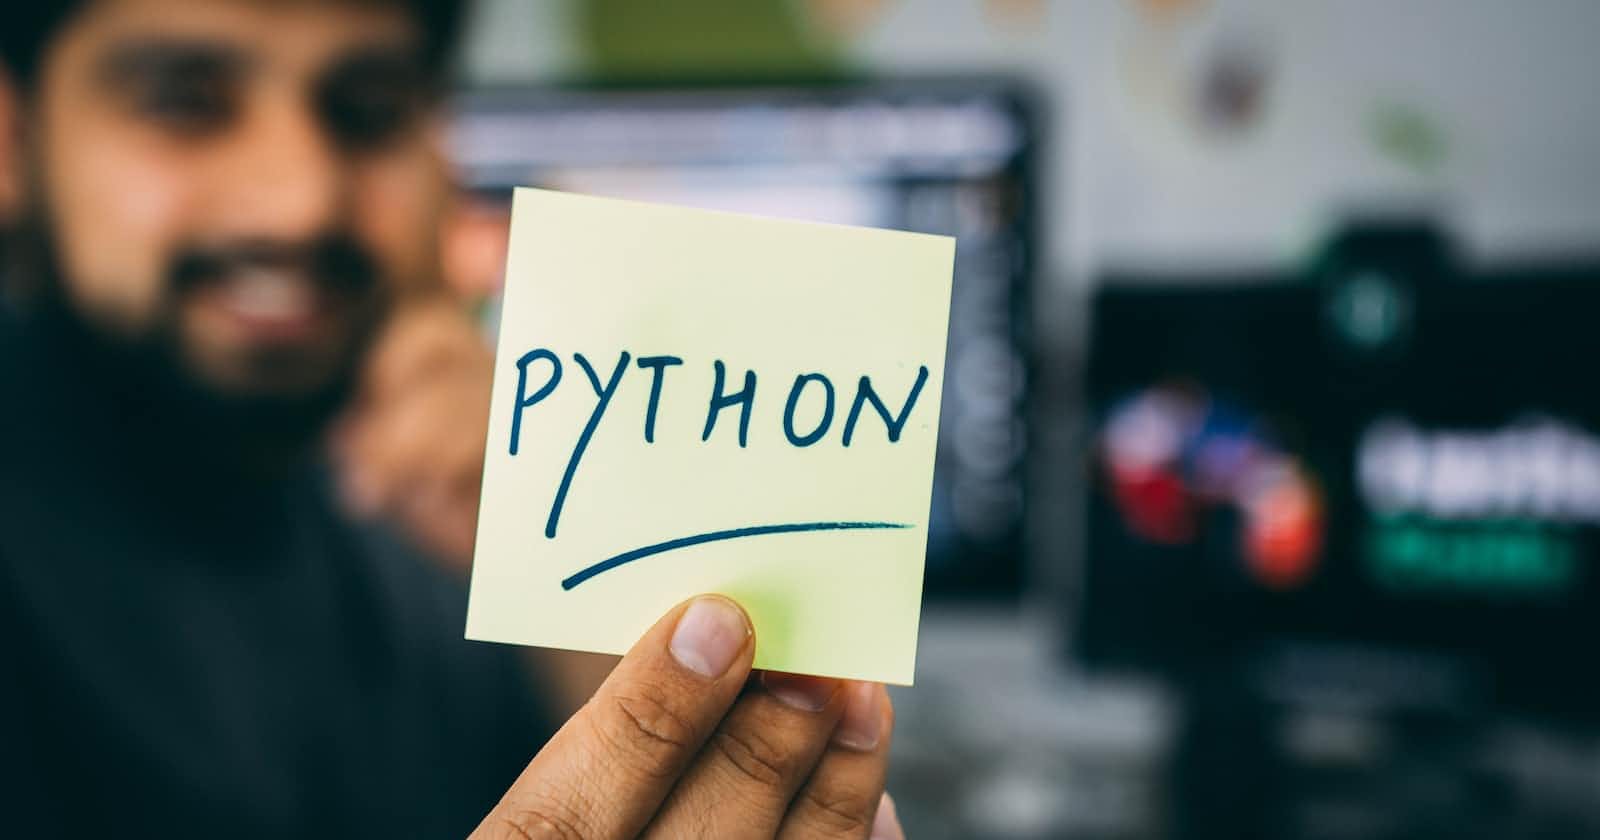 Common Python Beginner Mistakes With Default Arguments